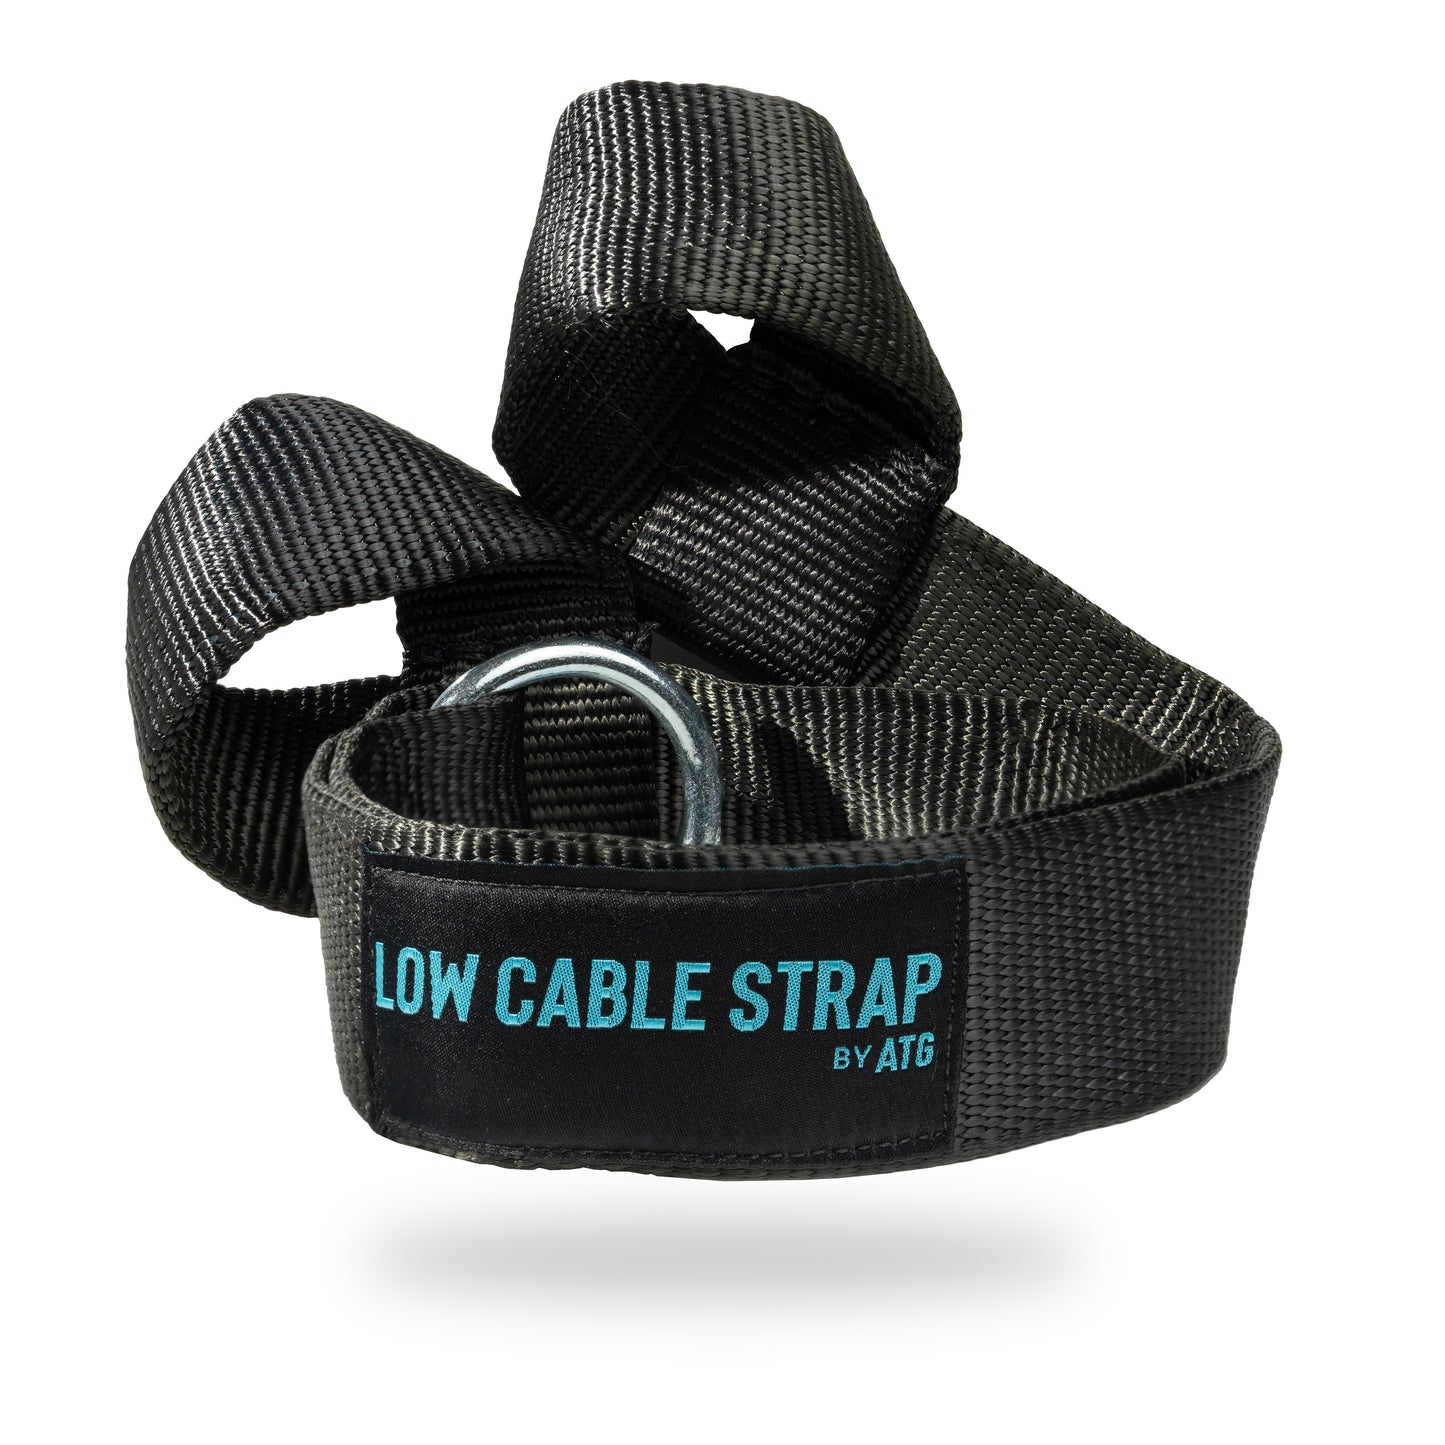 American-Made Low Cable Strap